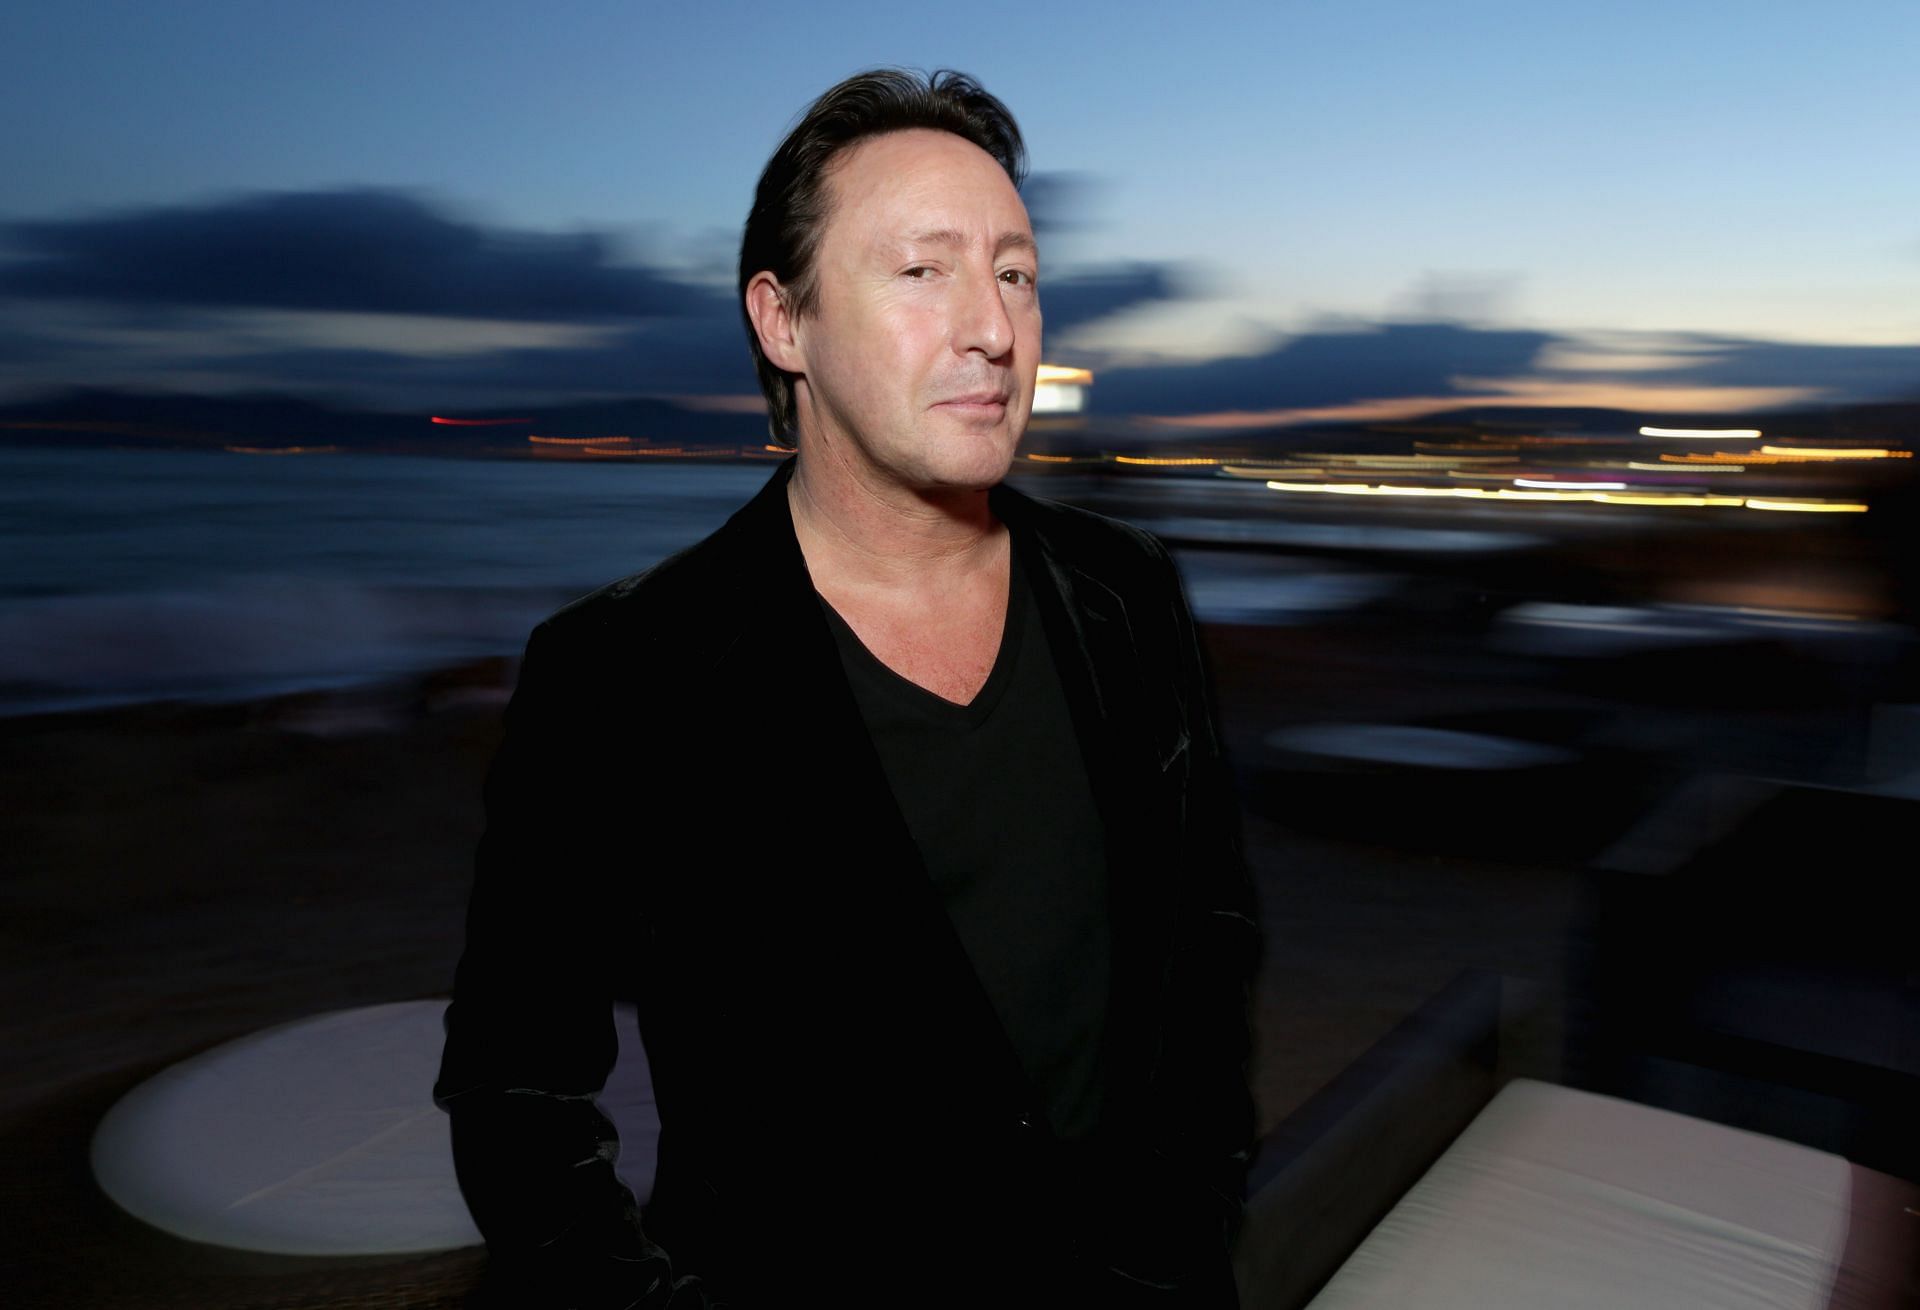 Torch Cannes Day 4 - Julian Lennon Dinner Hosted By The Creative Coalition - The 66th Annual Cannes Film Festival